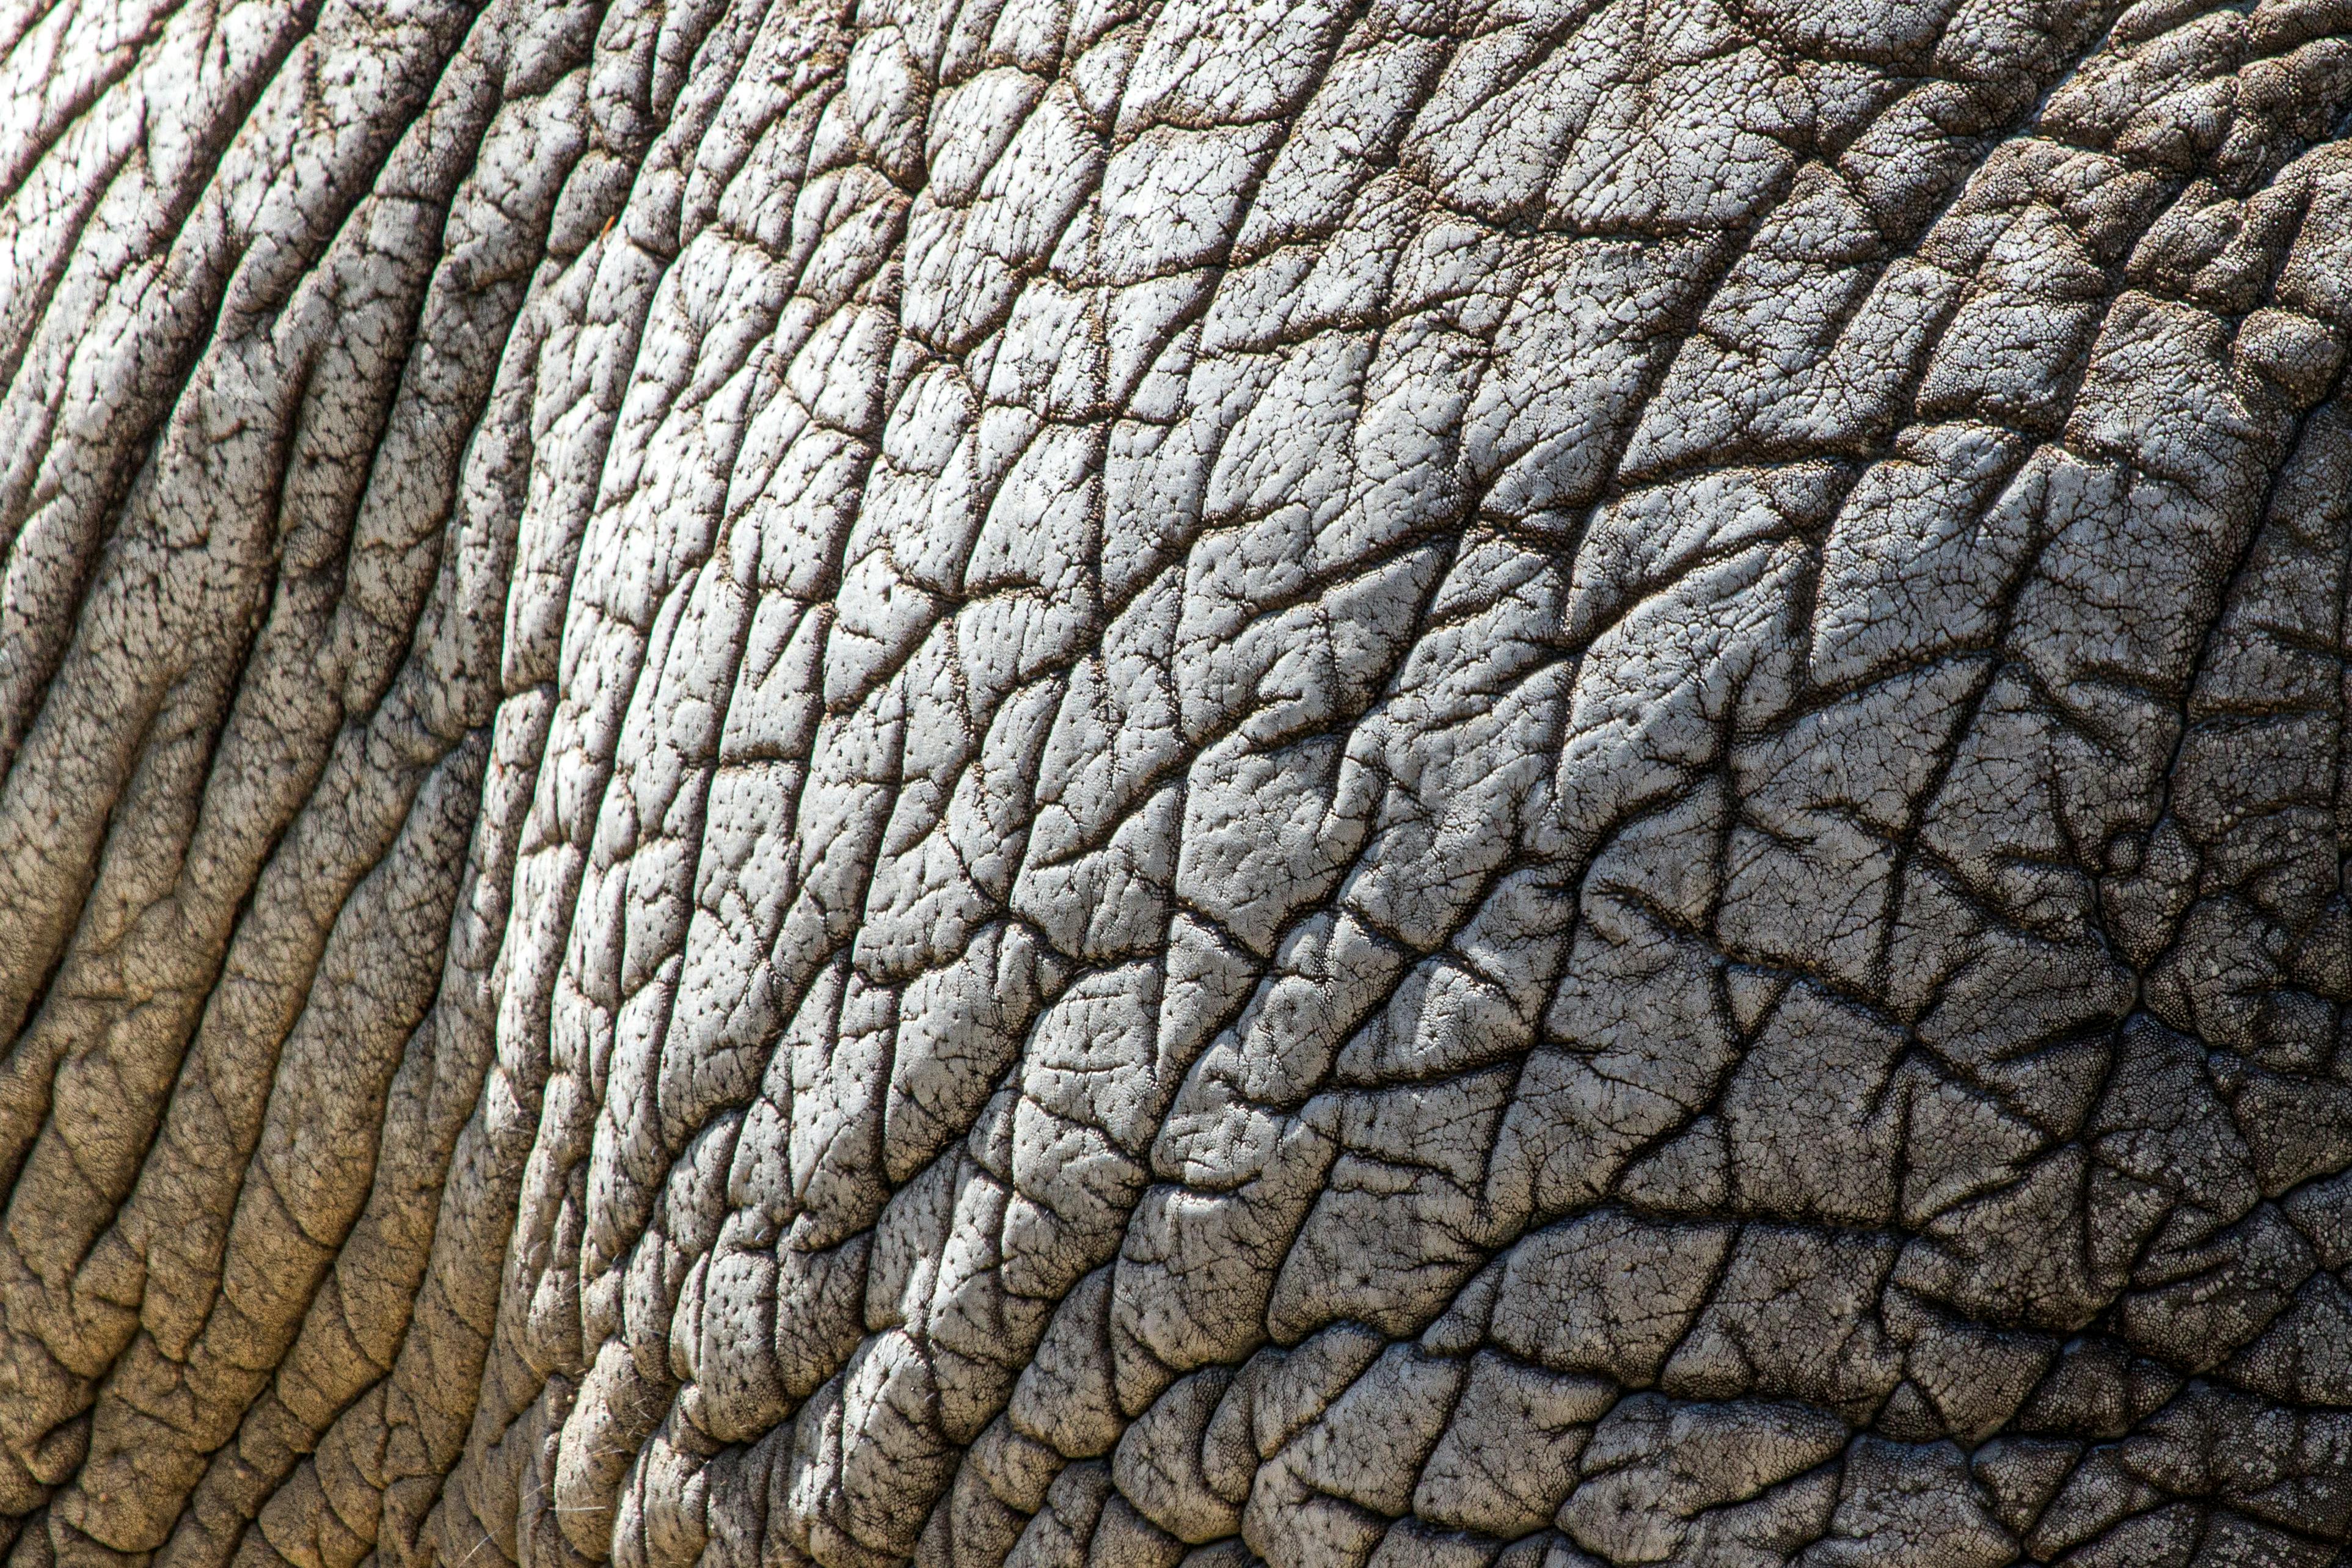 Close-up of an elephant's skin.